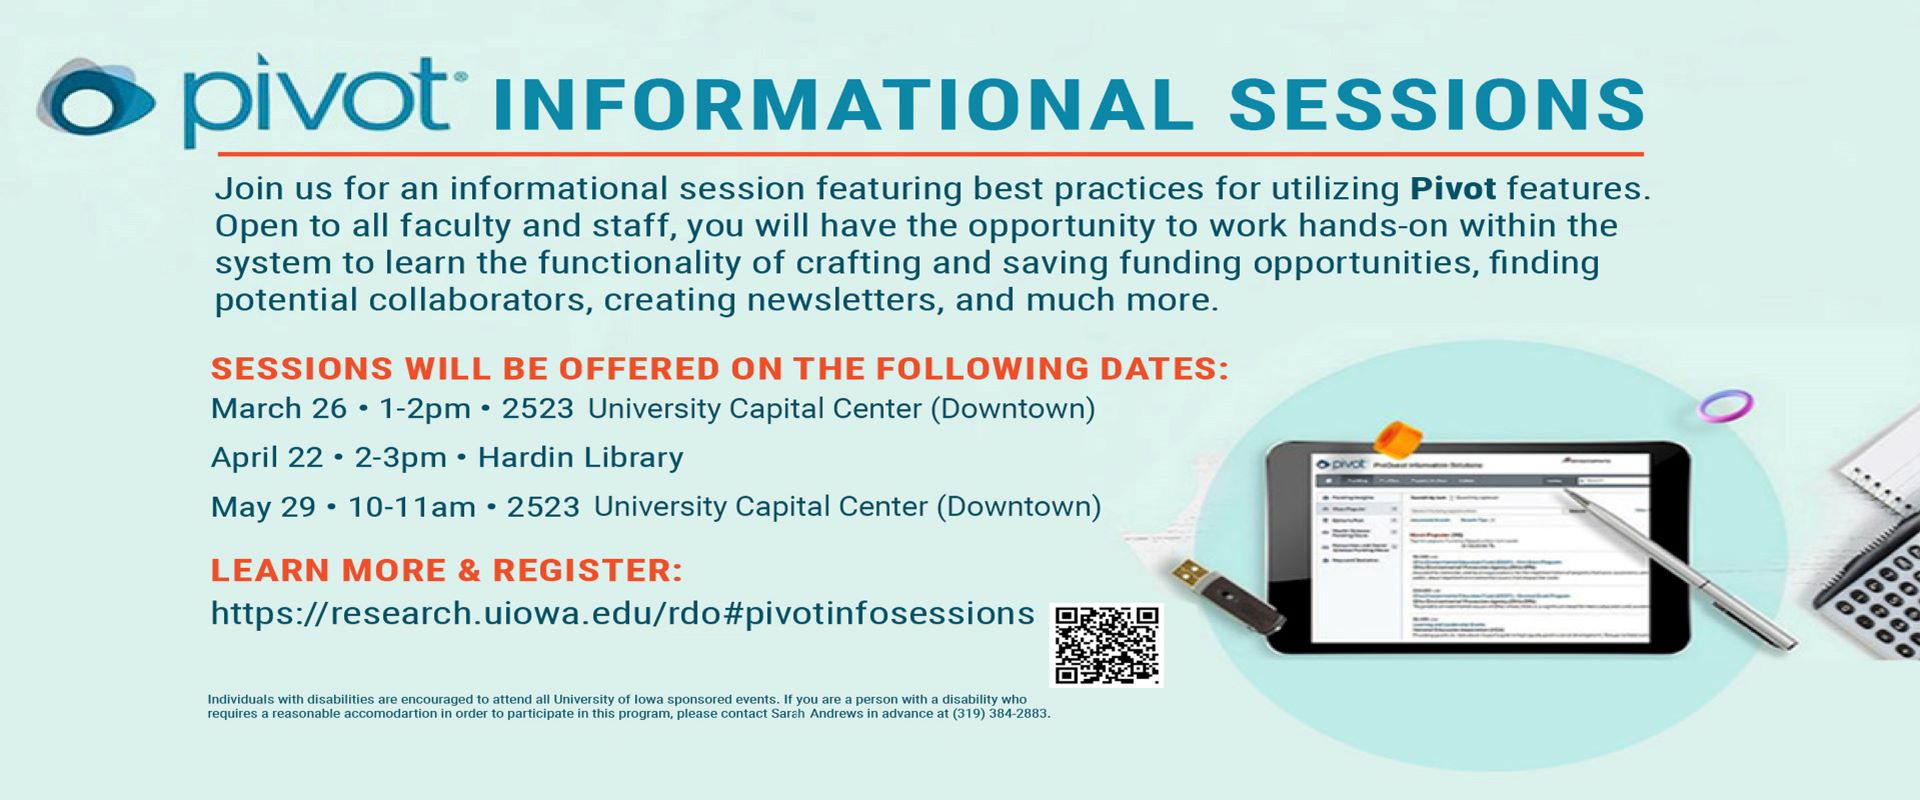 Pivot Informational Sessions